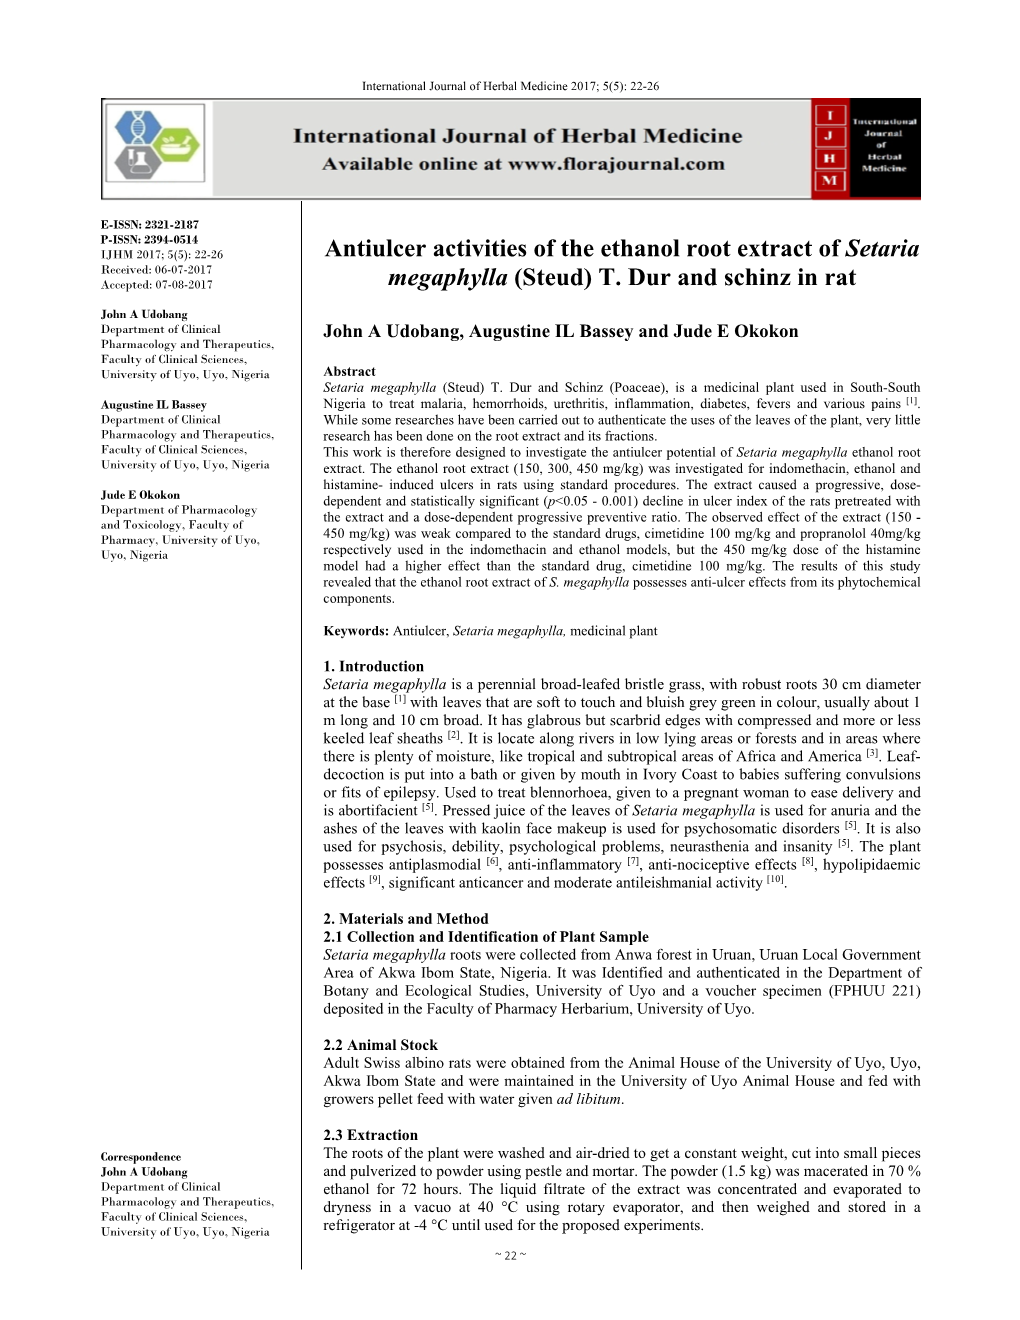 Antiulcer Activities of the Ethanol Root Extract of Setaria Megaphylla